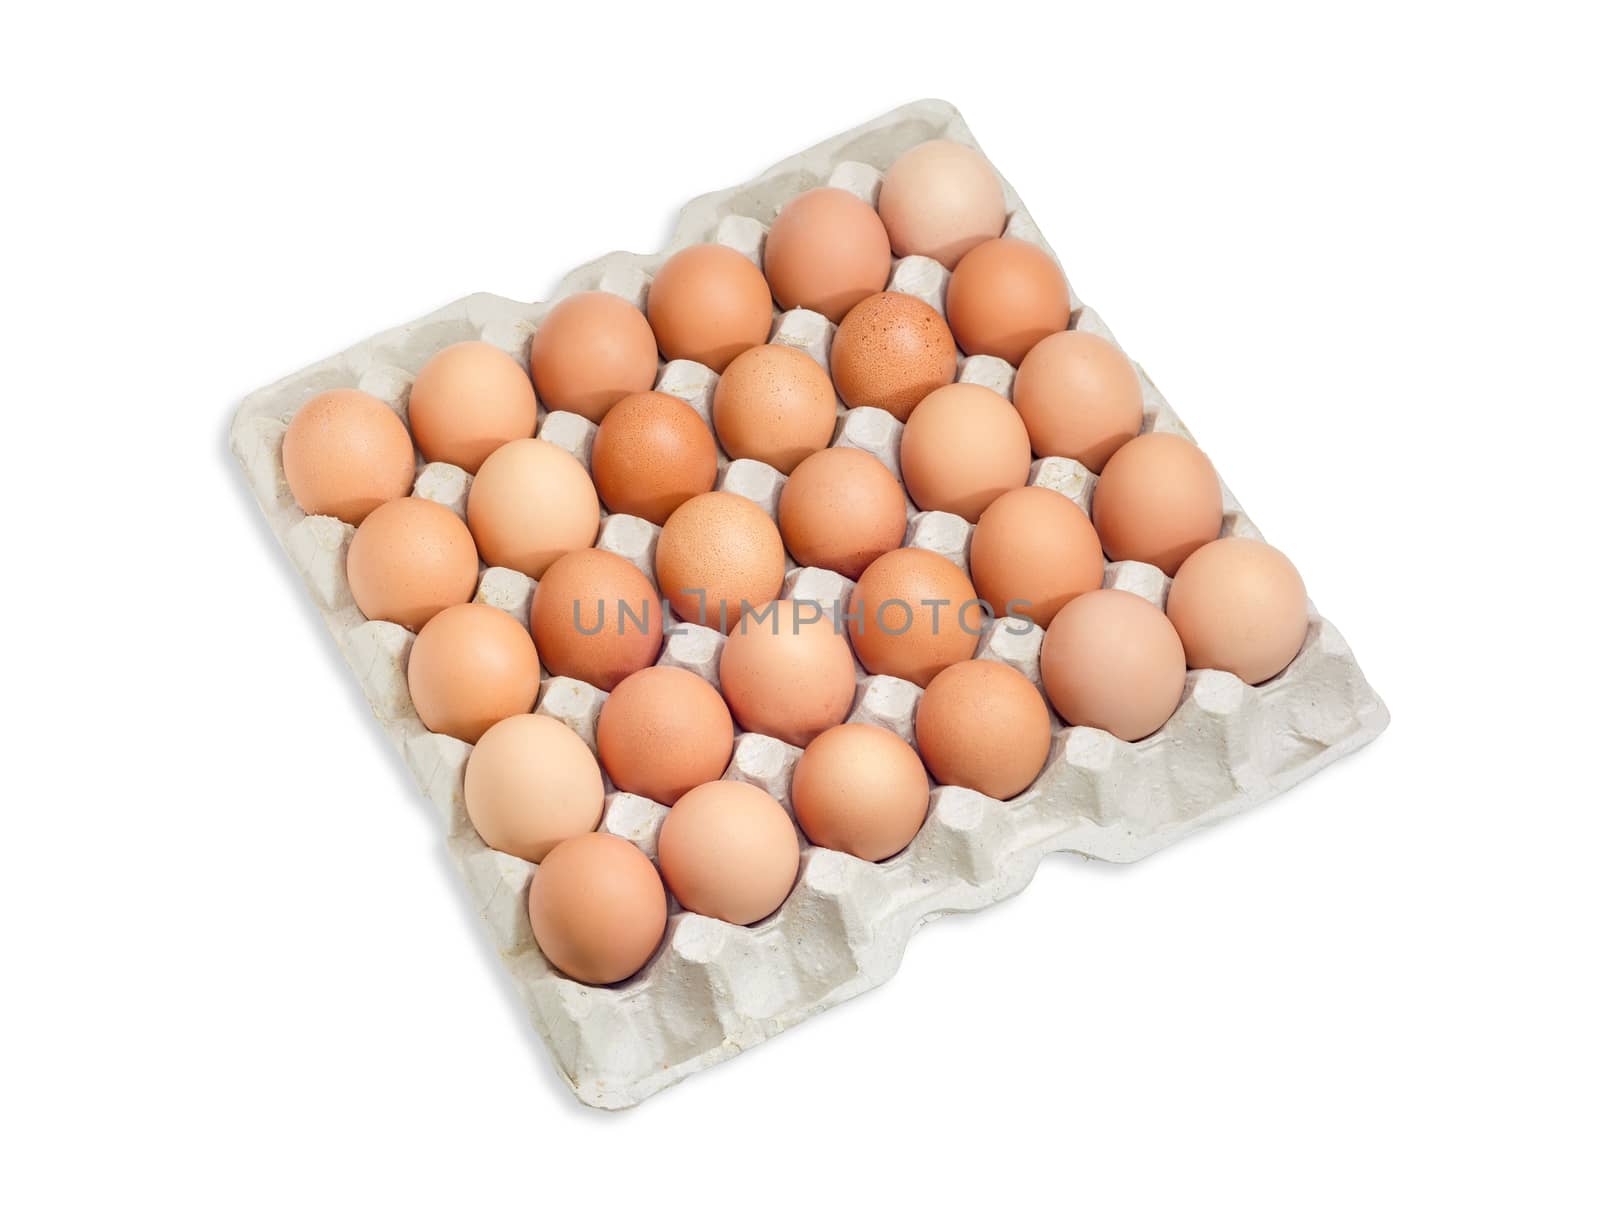 Top view of the cardboard egg tray with thirty brown and speckled chicken eggs on a light background
